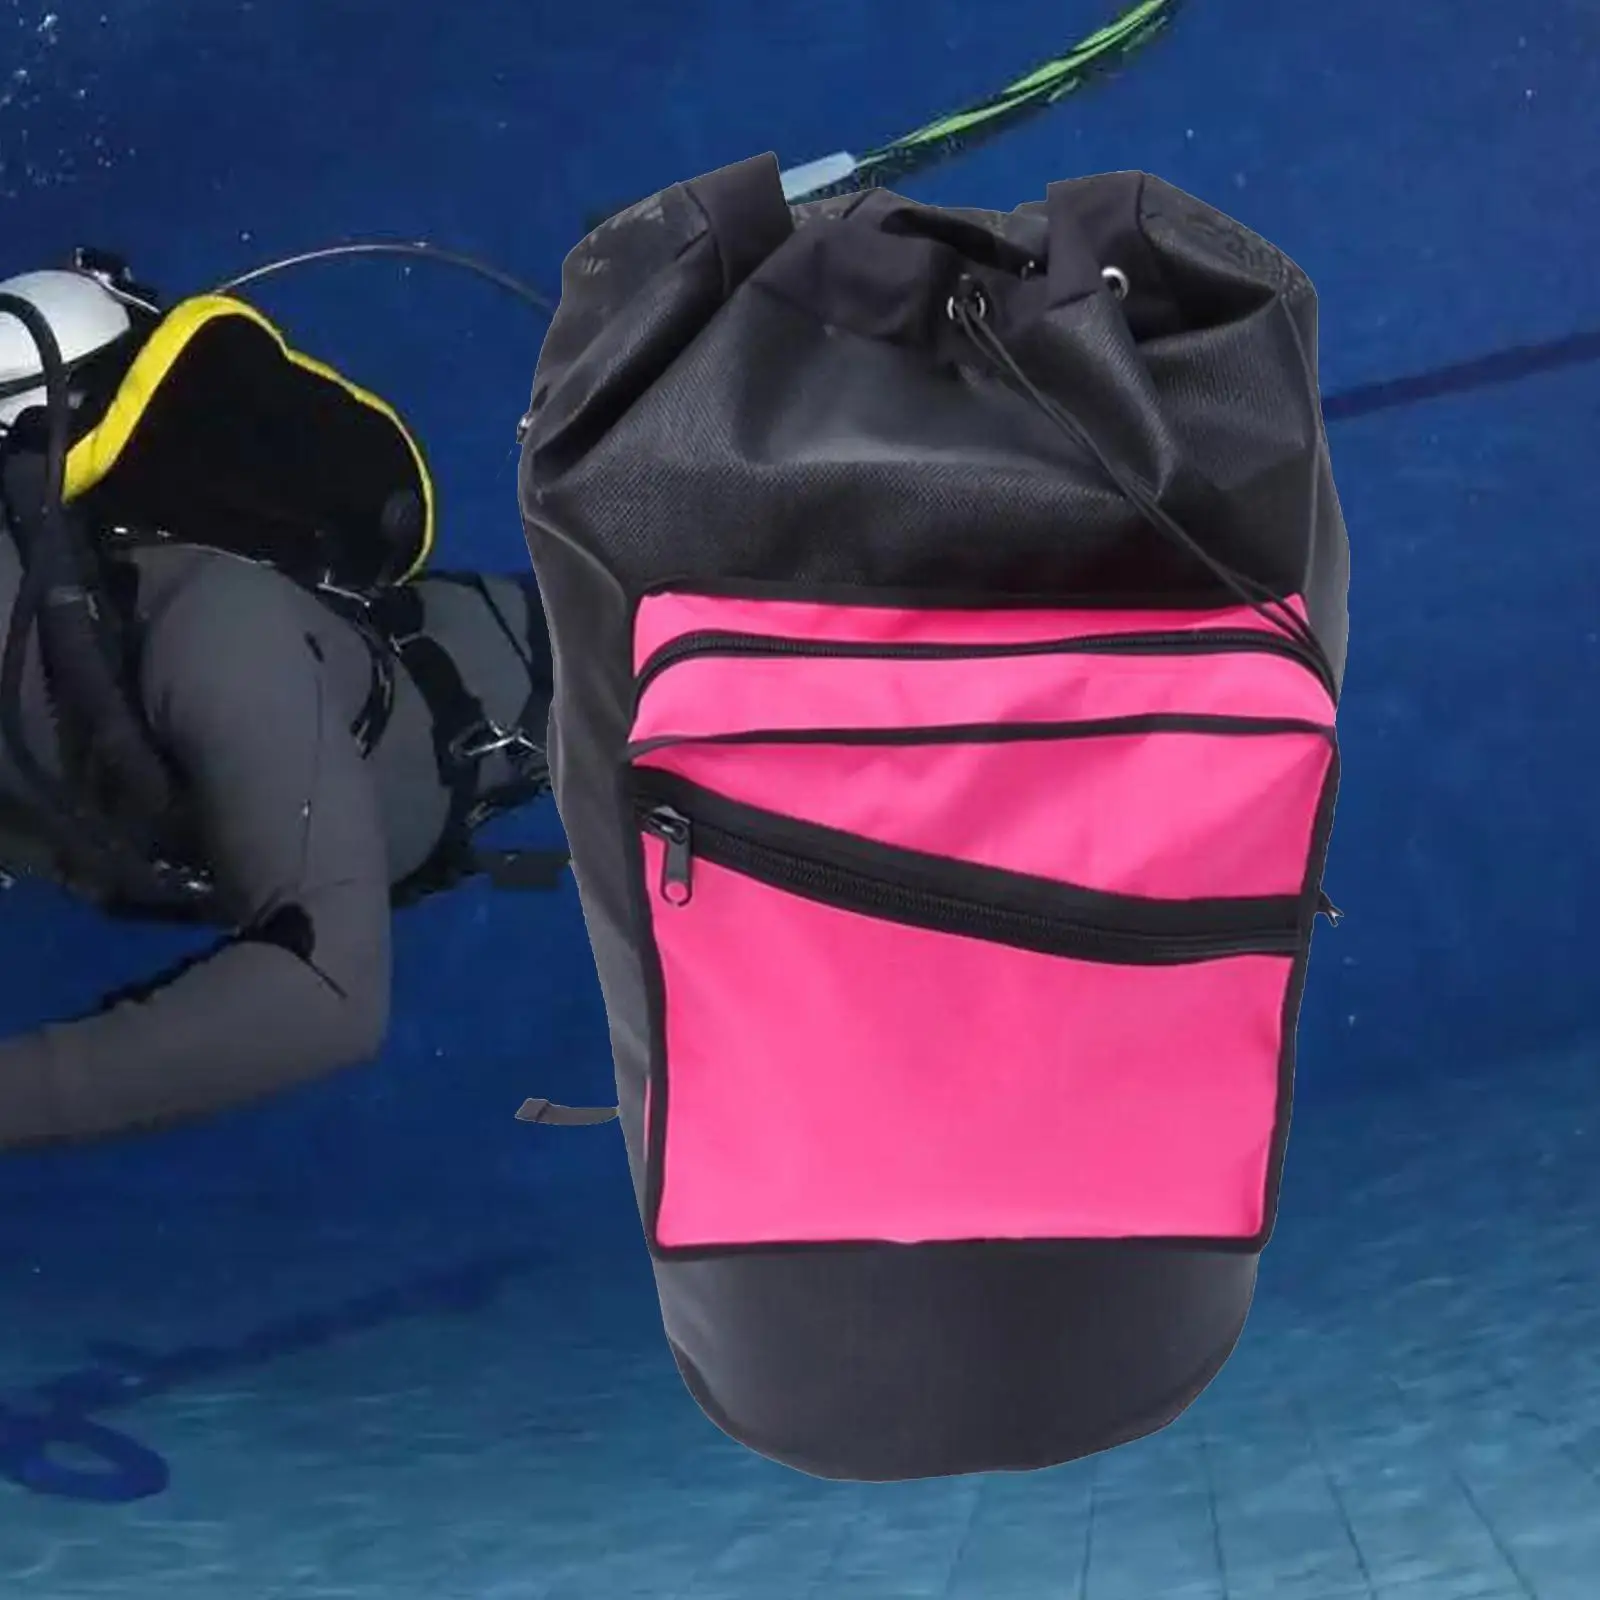 diving-backpack-duffle-snorkeling-equipment-backpack-diving-travel-backpack-for-swimming-underwater-water-sports-sailing-beach